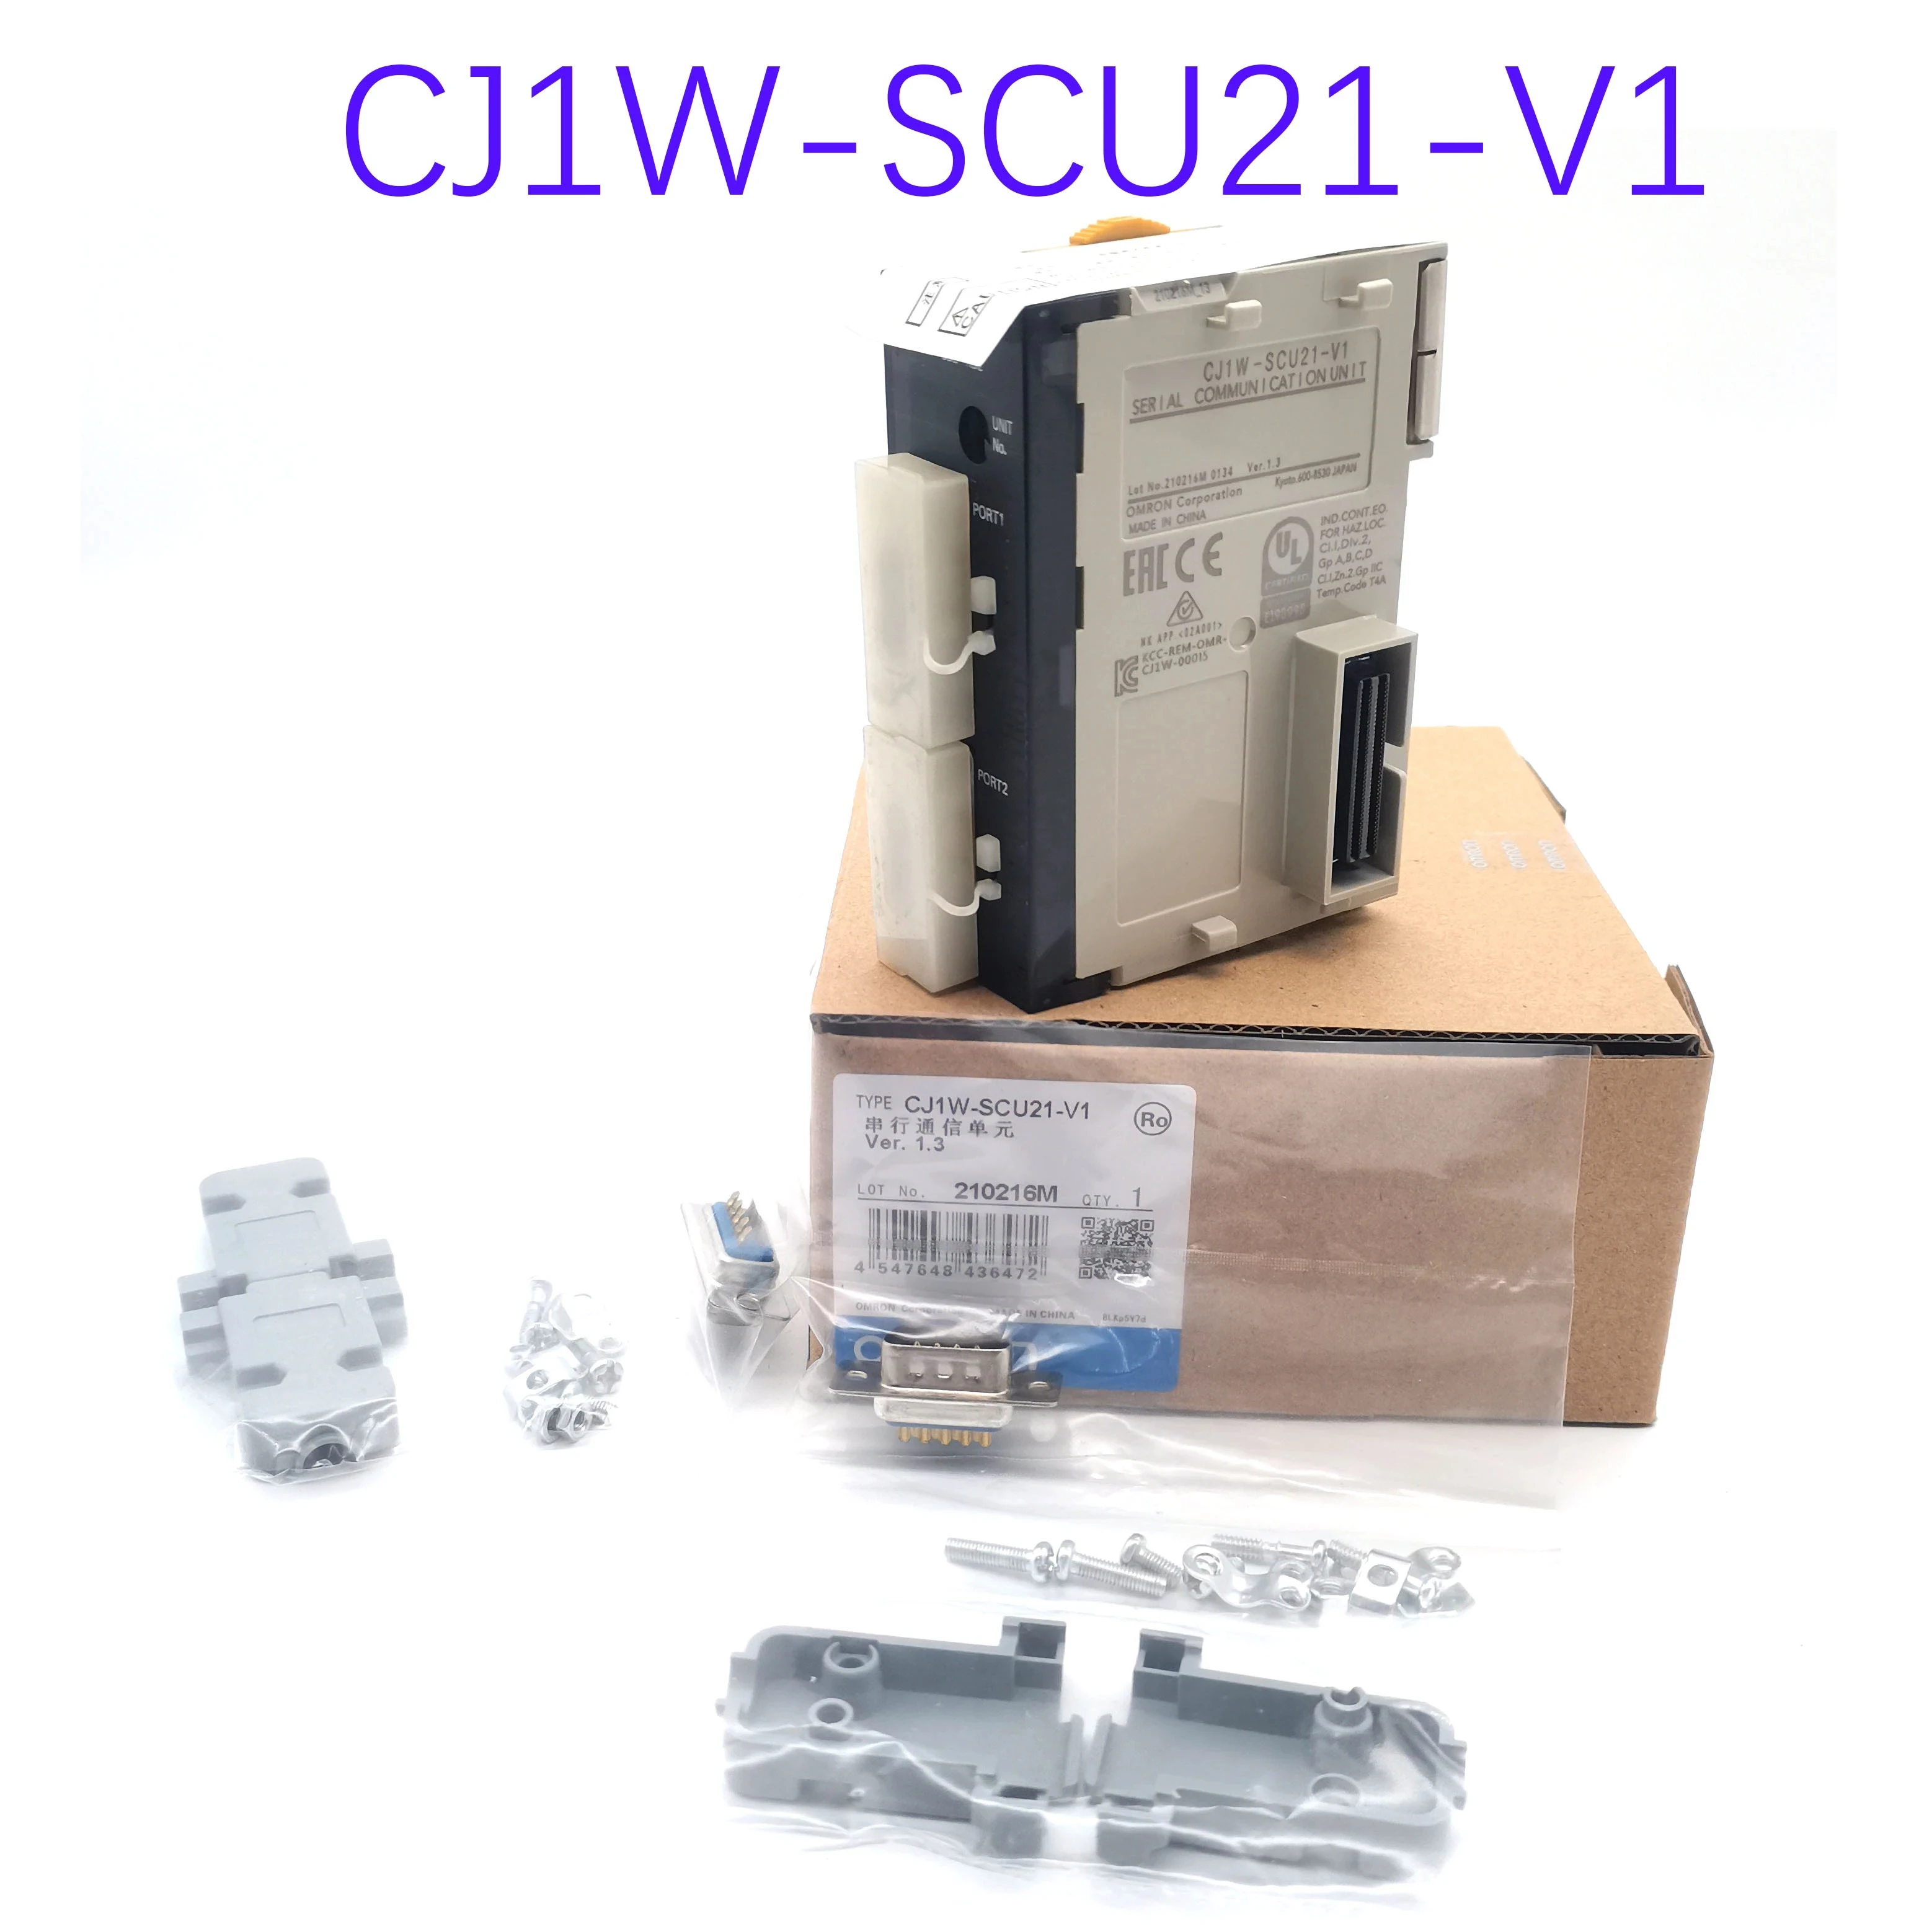 New original CJ1W-SCU21-V1 CJ1W SCU21 V1 CJ1WSCU21V1 warranty for one year  AliExpress